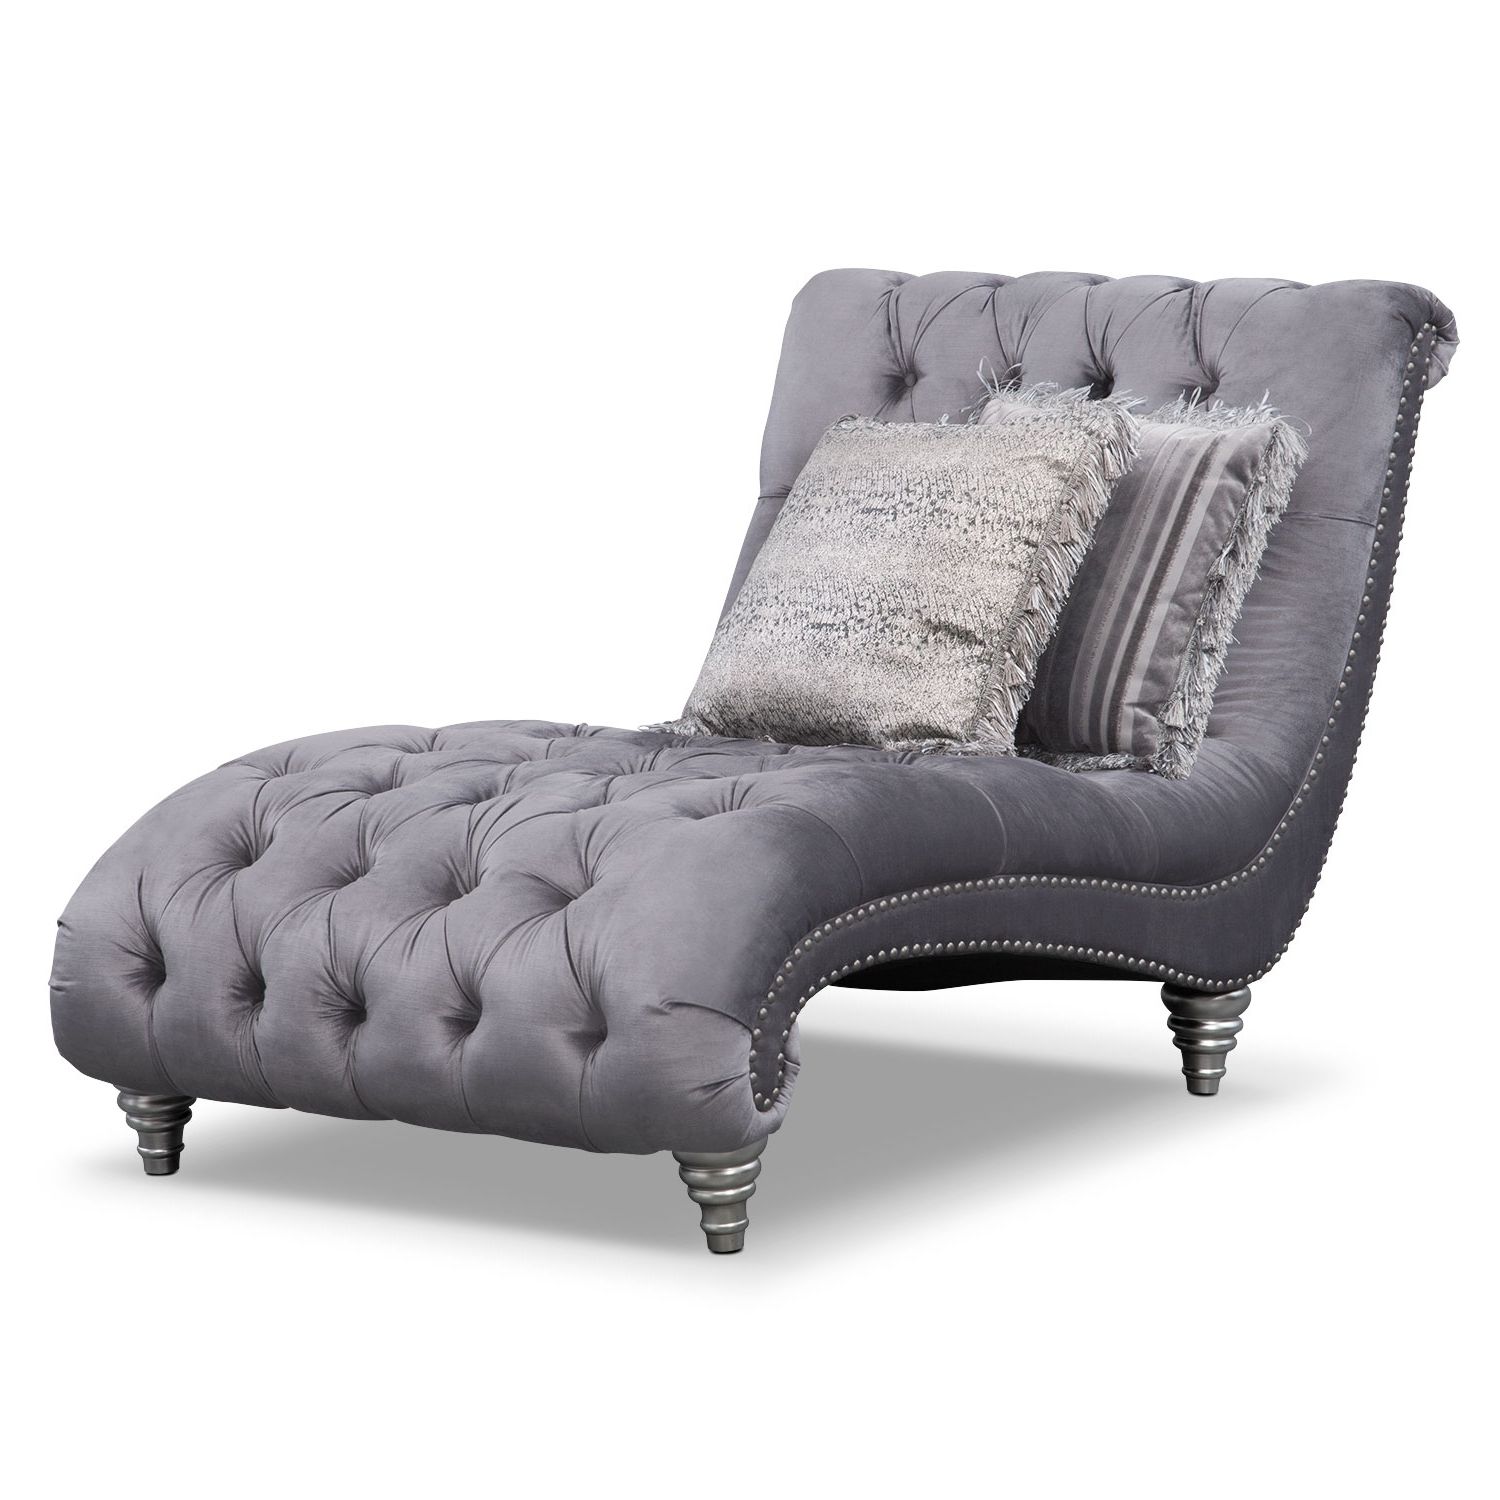 Gray Chaise Lounge Chair • Lounge Chairs Ideas Pertaining To Most Recently Released Gray Chaise Lounge Chairs (View 1 of 15)